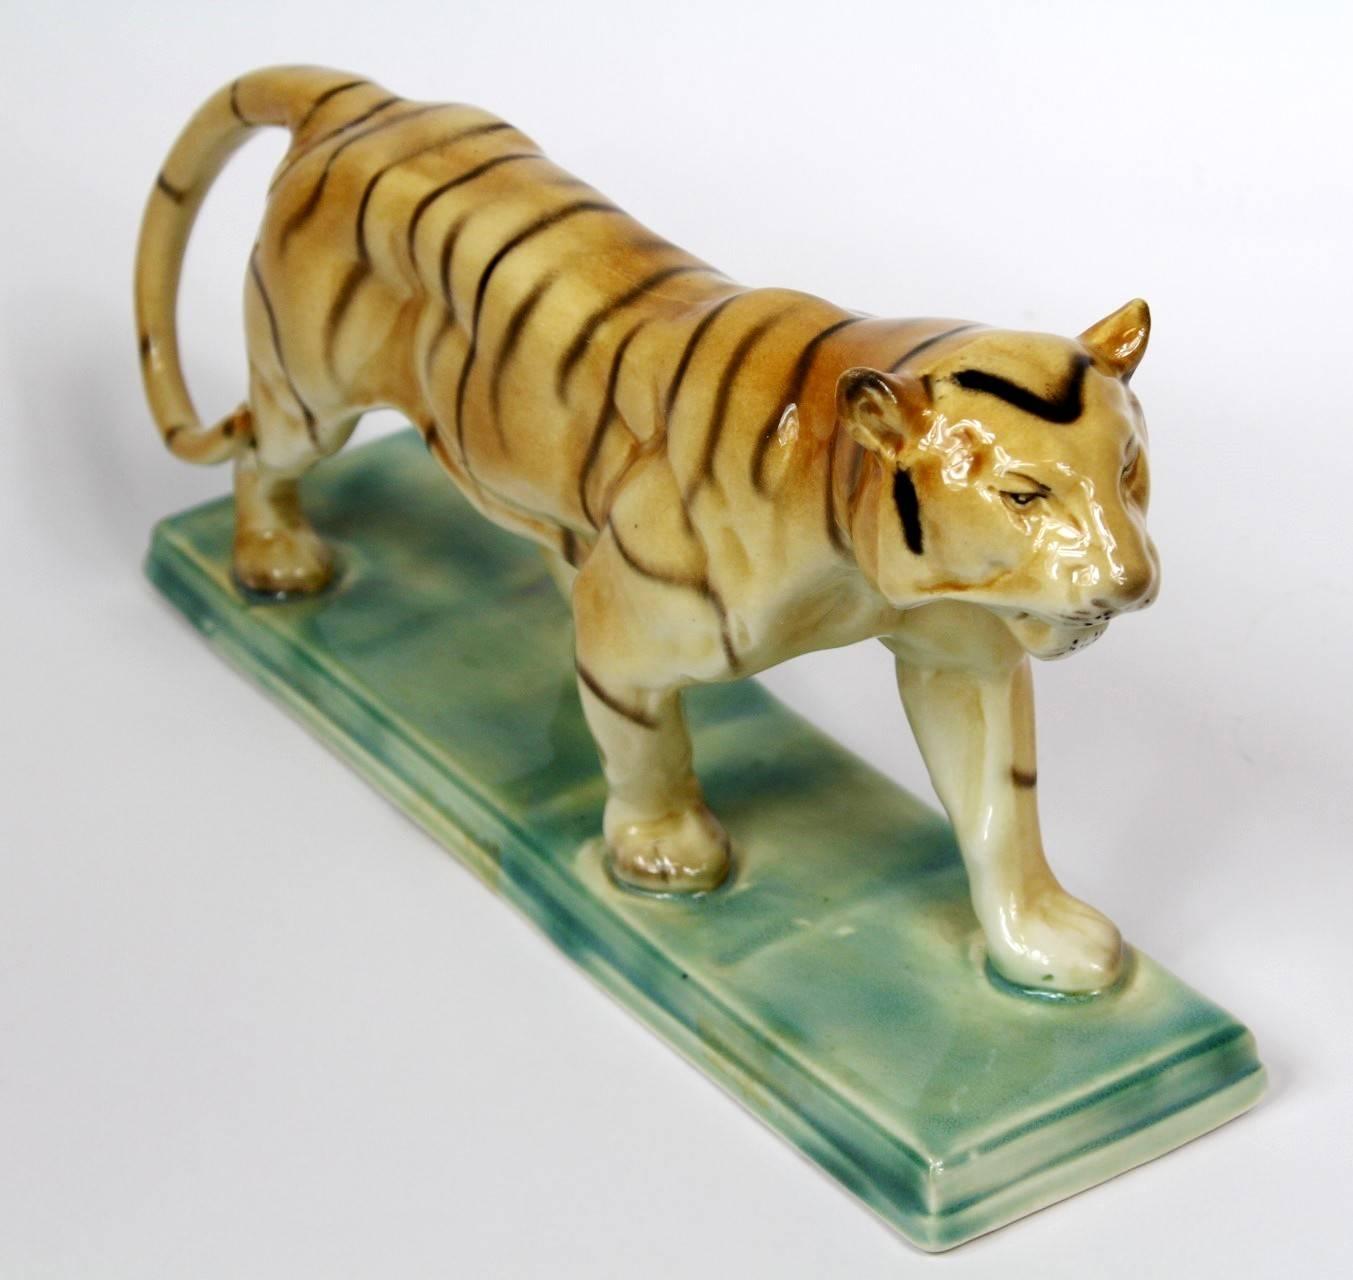 Glazed ceramic tiger sculpture made by Ditmar Urbach in Czechoslovakia in the 1930s. Excellent original condition.